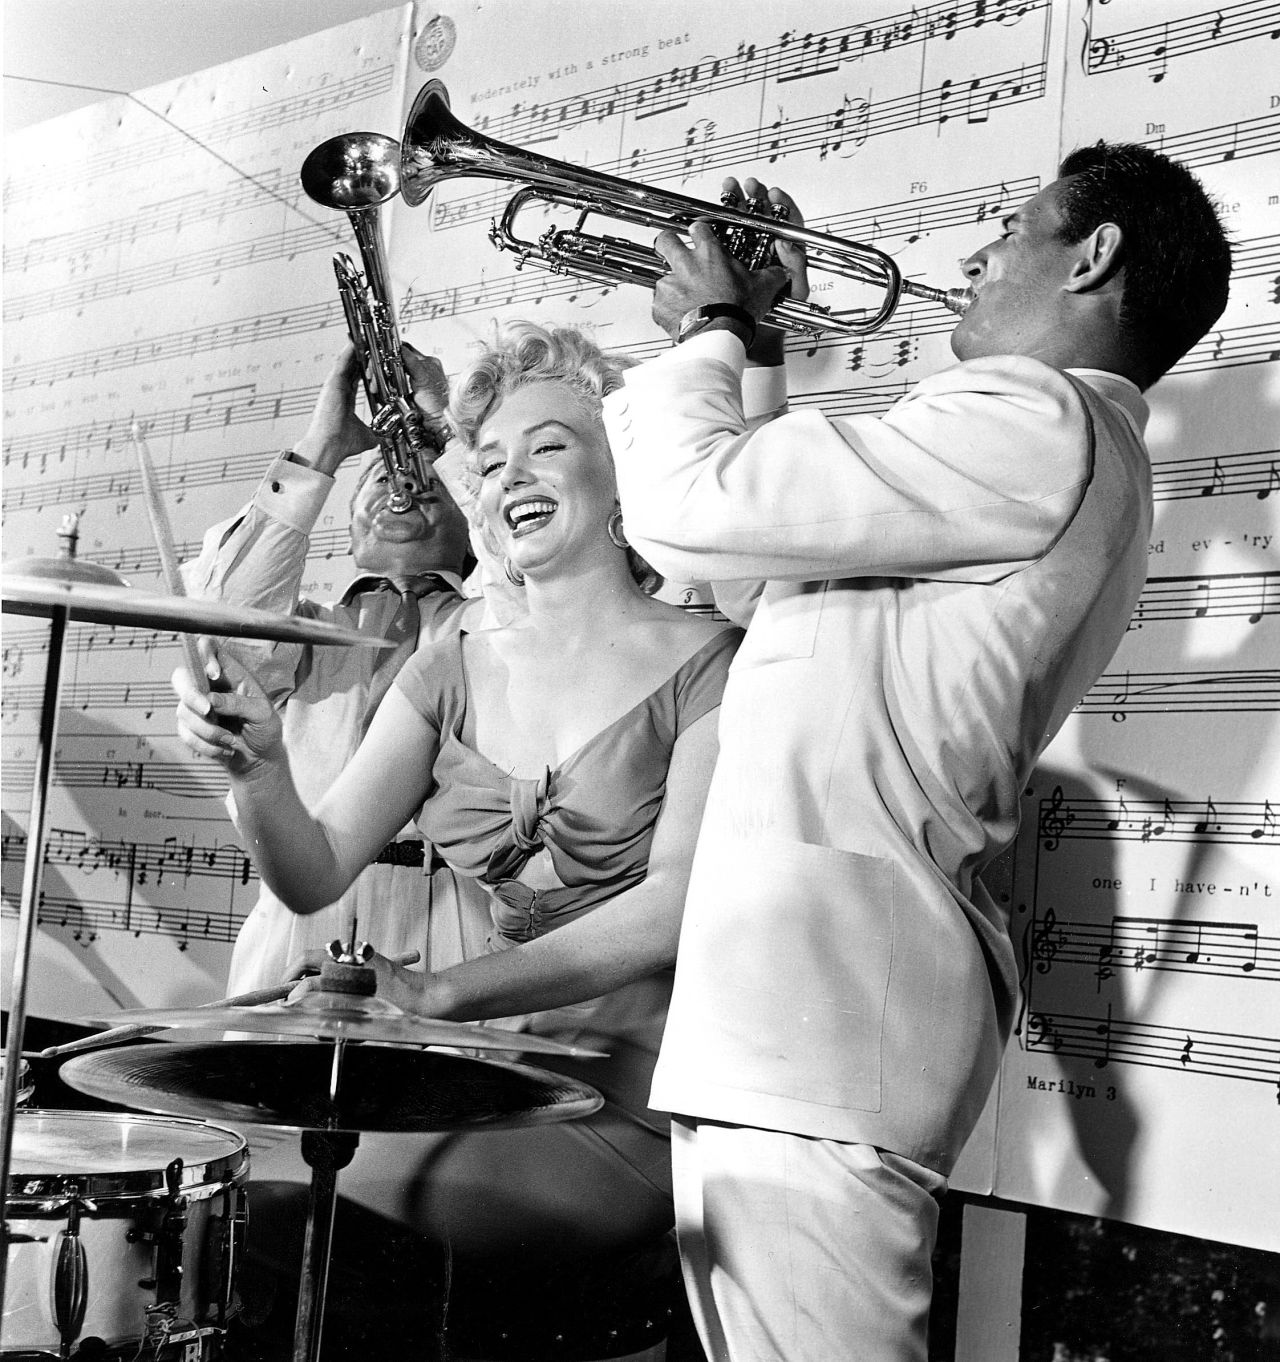 By the 1950s, Monroe was a household name. In 1953, she made history by becoming the first cover and centerfold of "Playboy" magazine. In this photo, Monroe is playing the drums with the Ray Anthony Band.